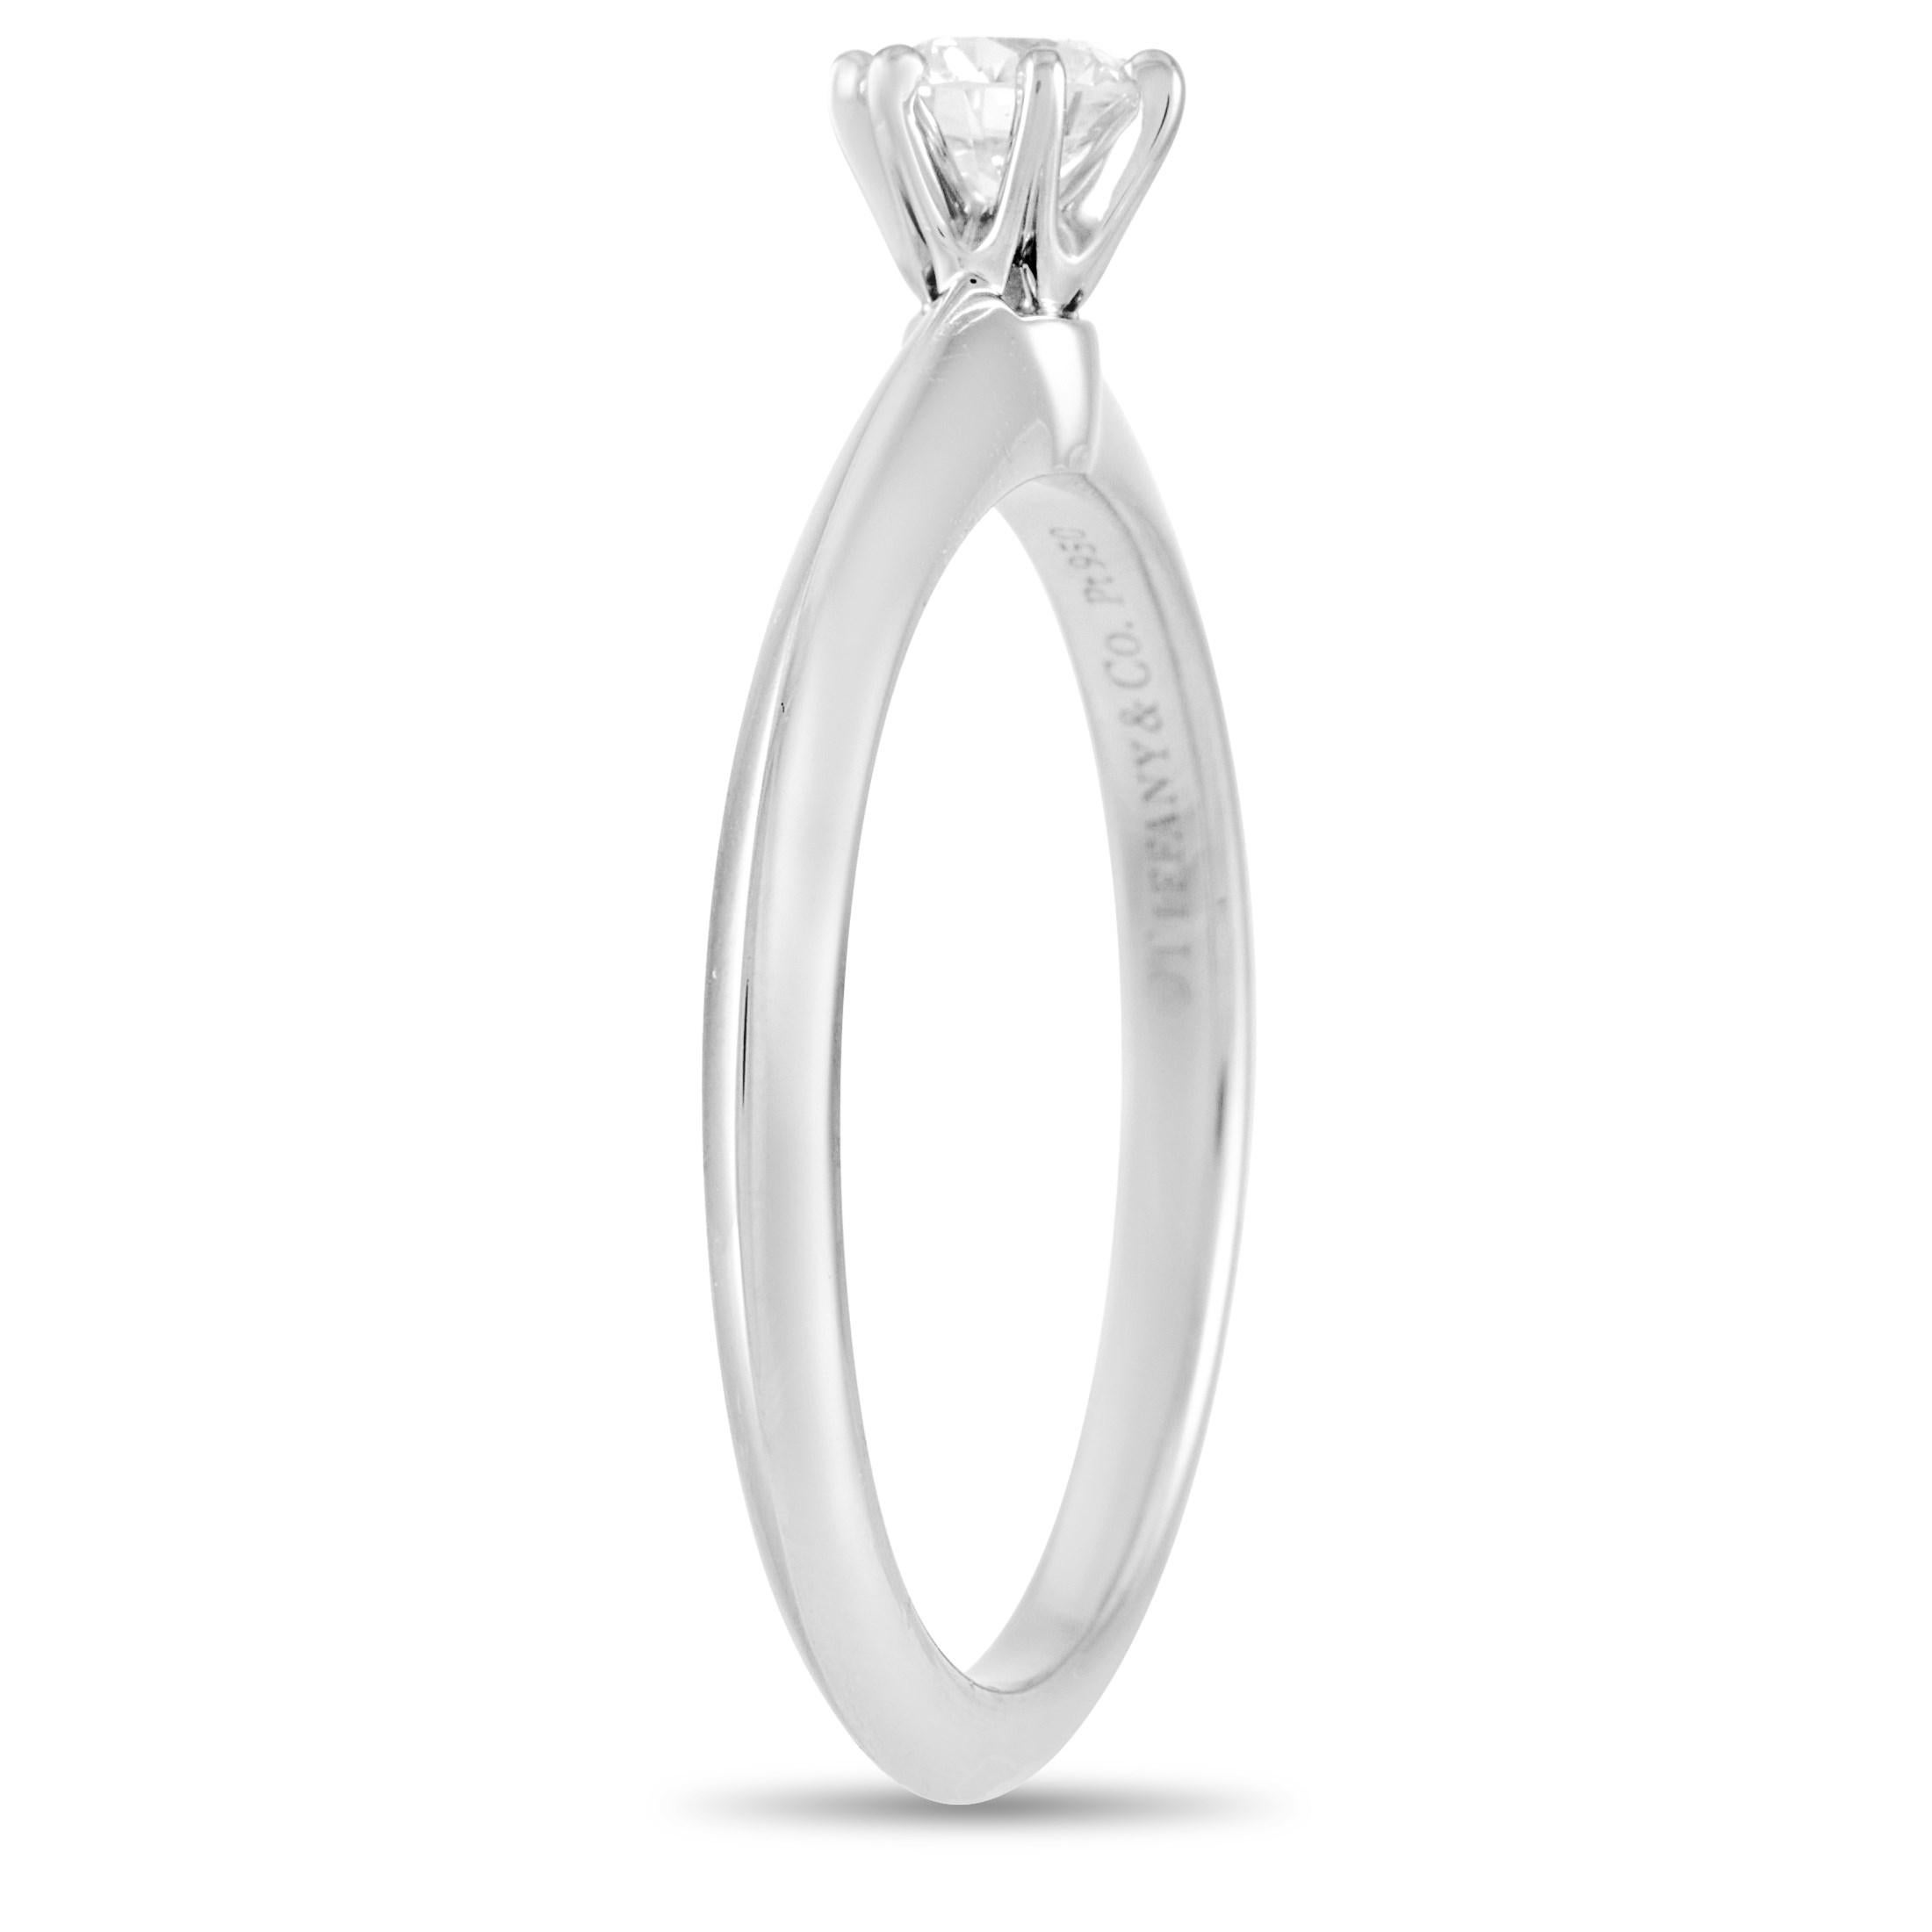 This classic Tiffany & Co. Platinum Solitaire 0.27 ct Diamond Engagement Ring is a timeless piece. The simple band is made with platinum and highlights a single 0.27 carat round-cut diamond of I color and VVS1 clarity. The ring weighs a total of 3.7